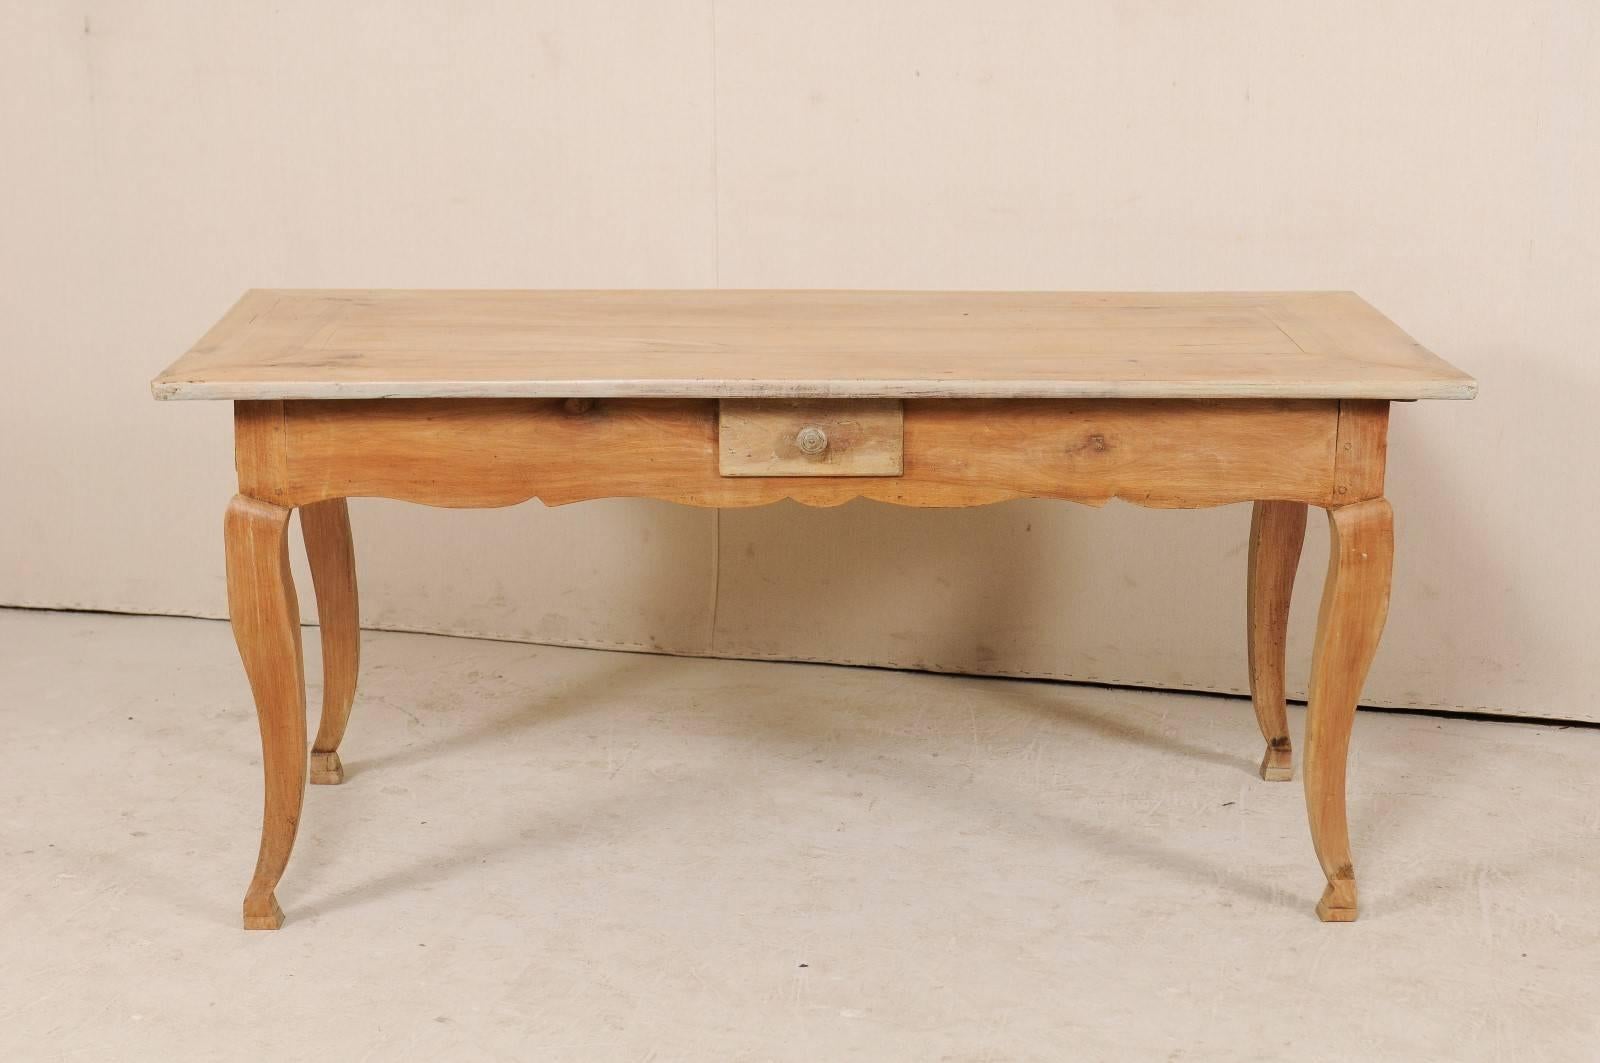 French Provincial French 19th Century Louis XV Style Provincial Desk Table with Cabriole Legs